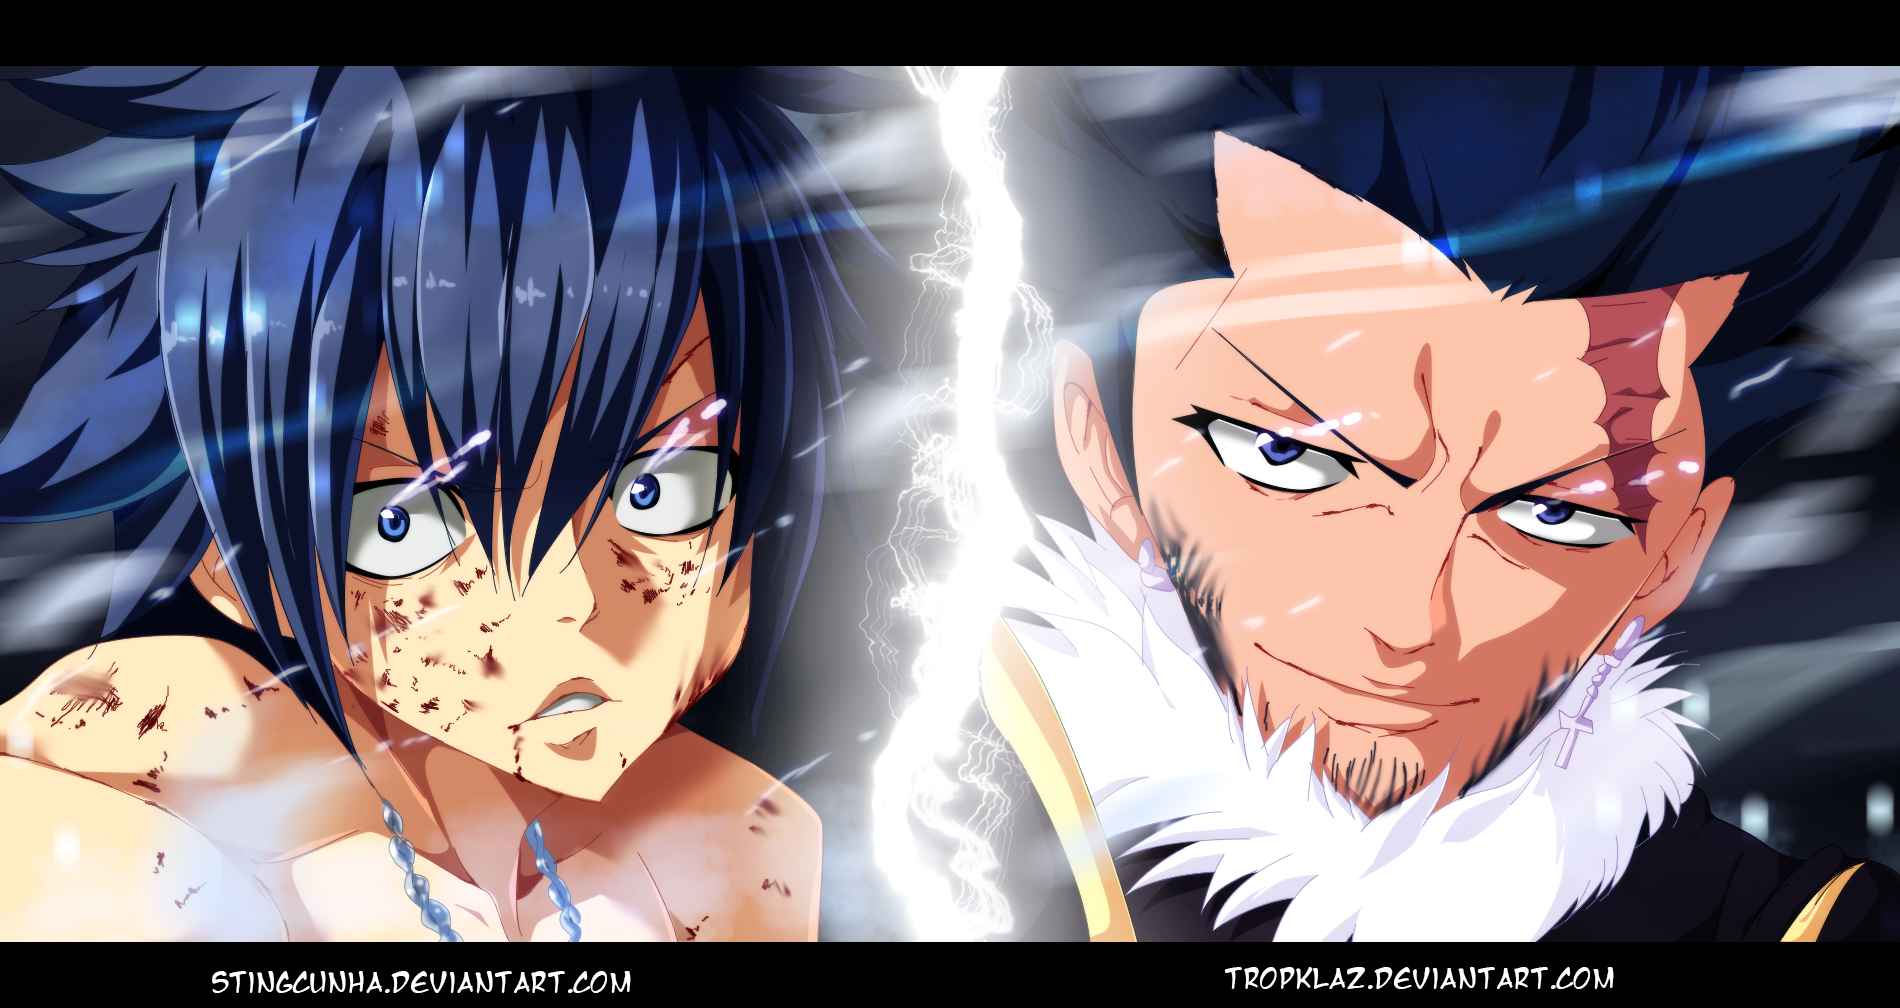 Wallpaper of Gray VS Silver for fans of Fairy Tail Villains. 